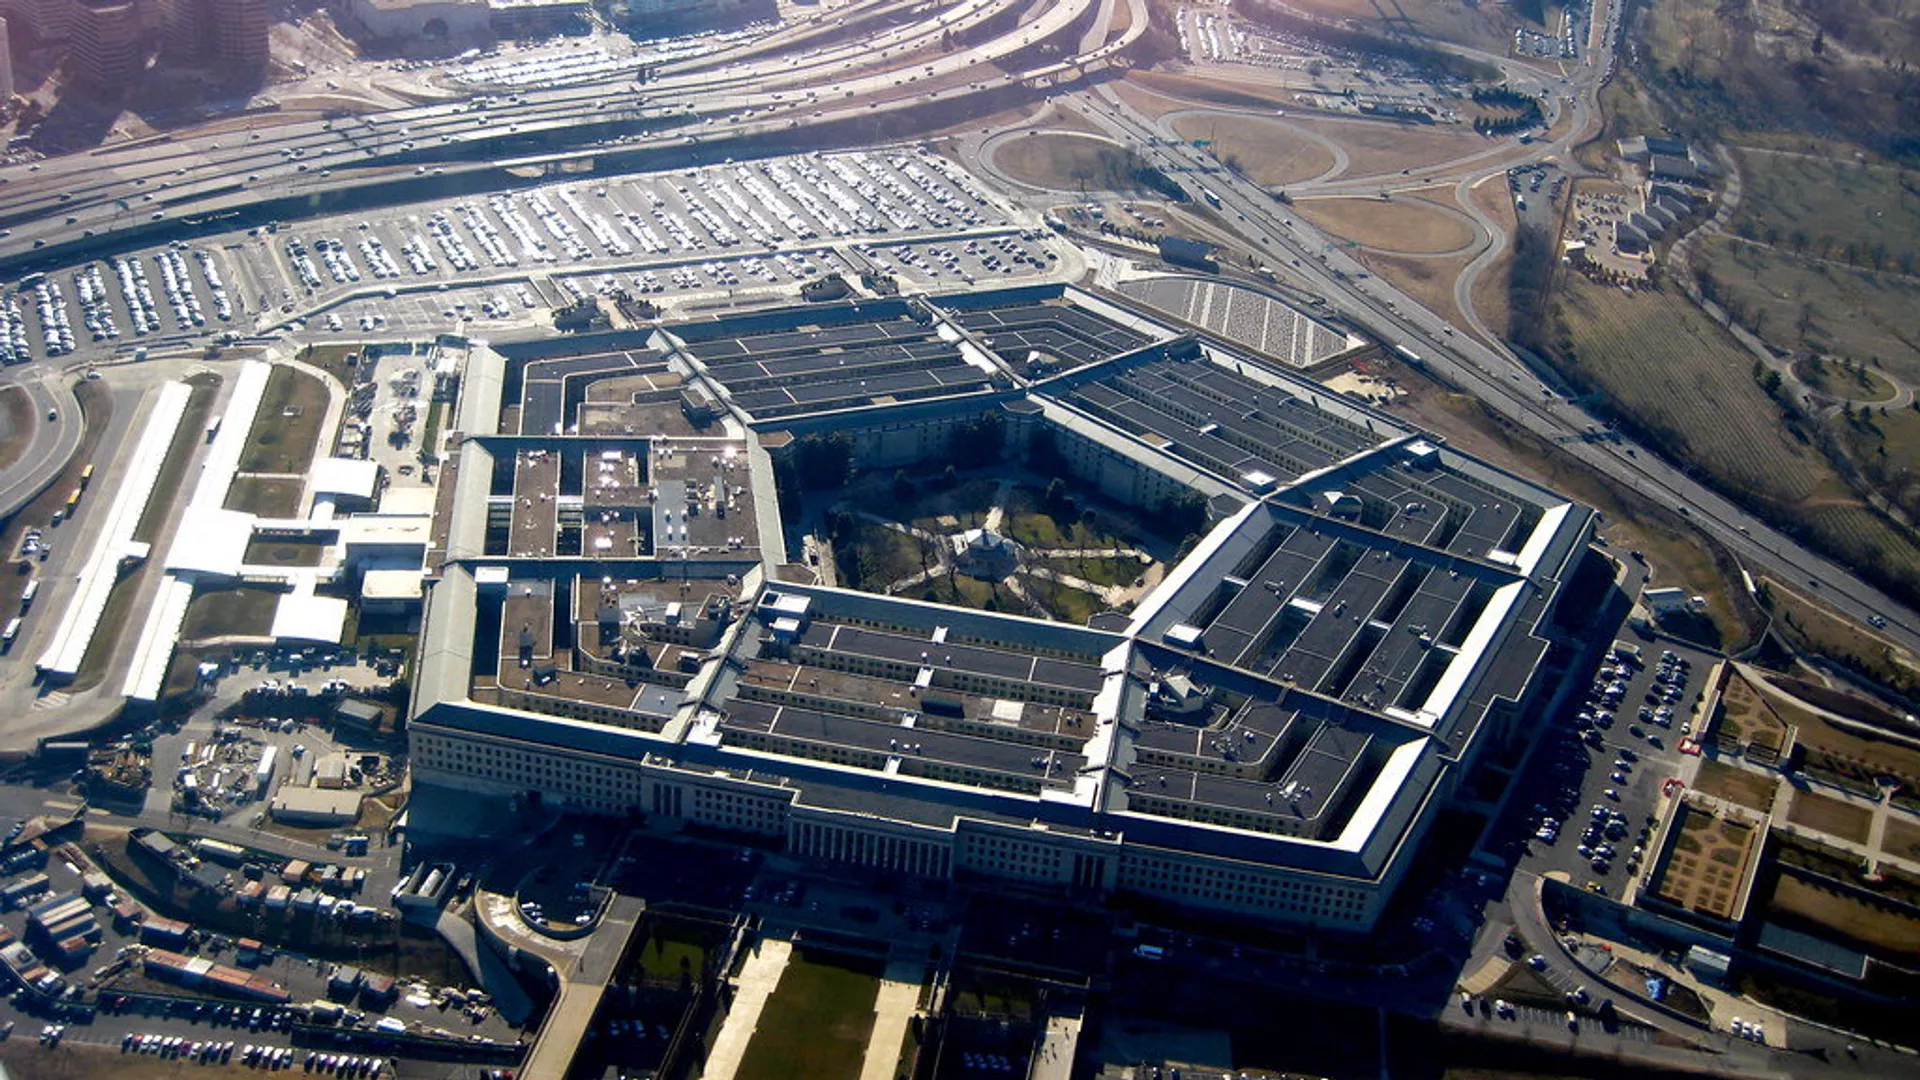 One Snowden-Like Dissenter LikelyBehind Leak of Pentagon Docs, Ex-CIAAnalyst Says